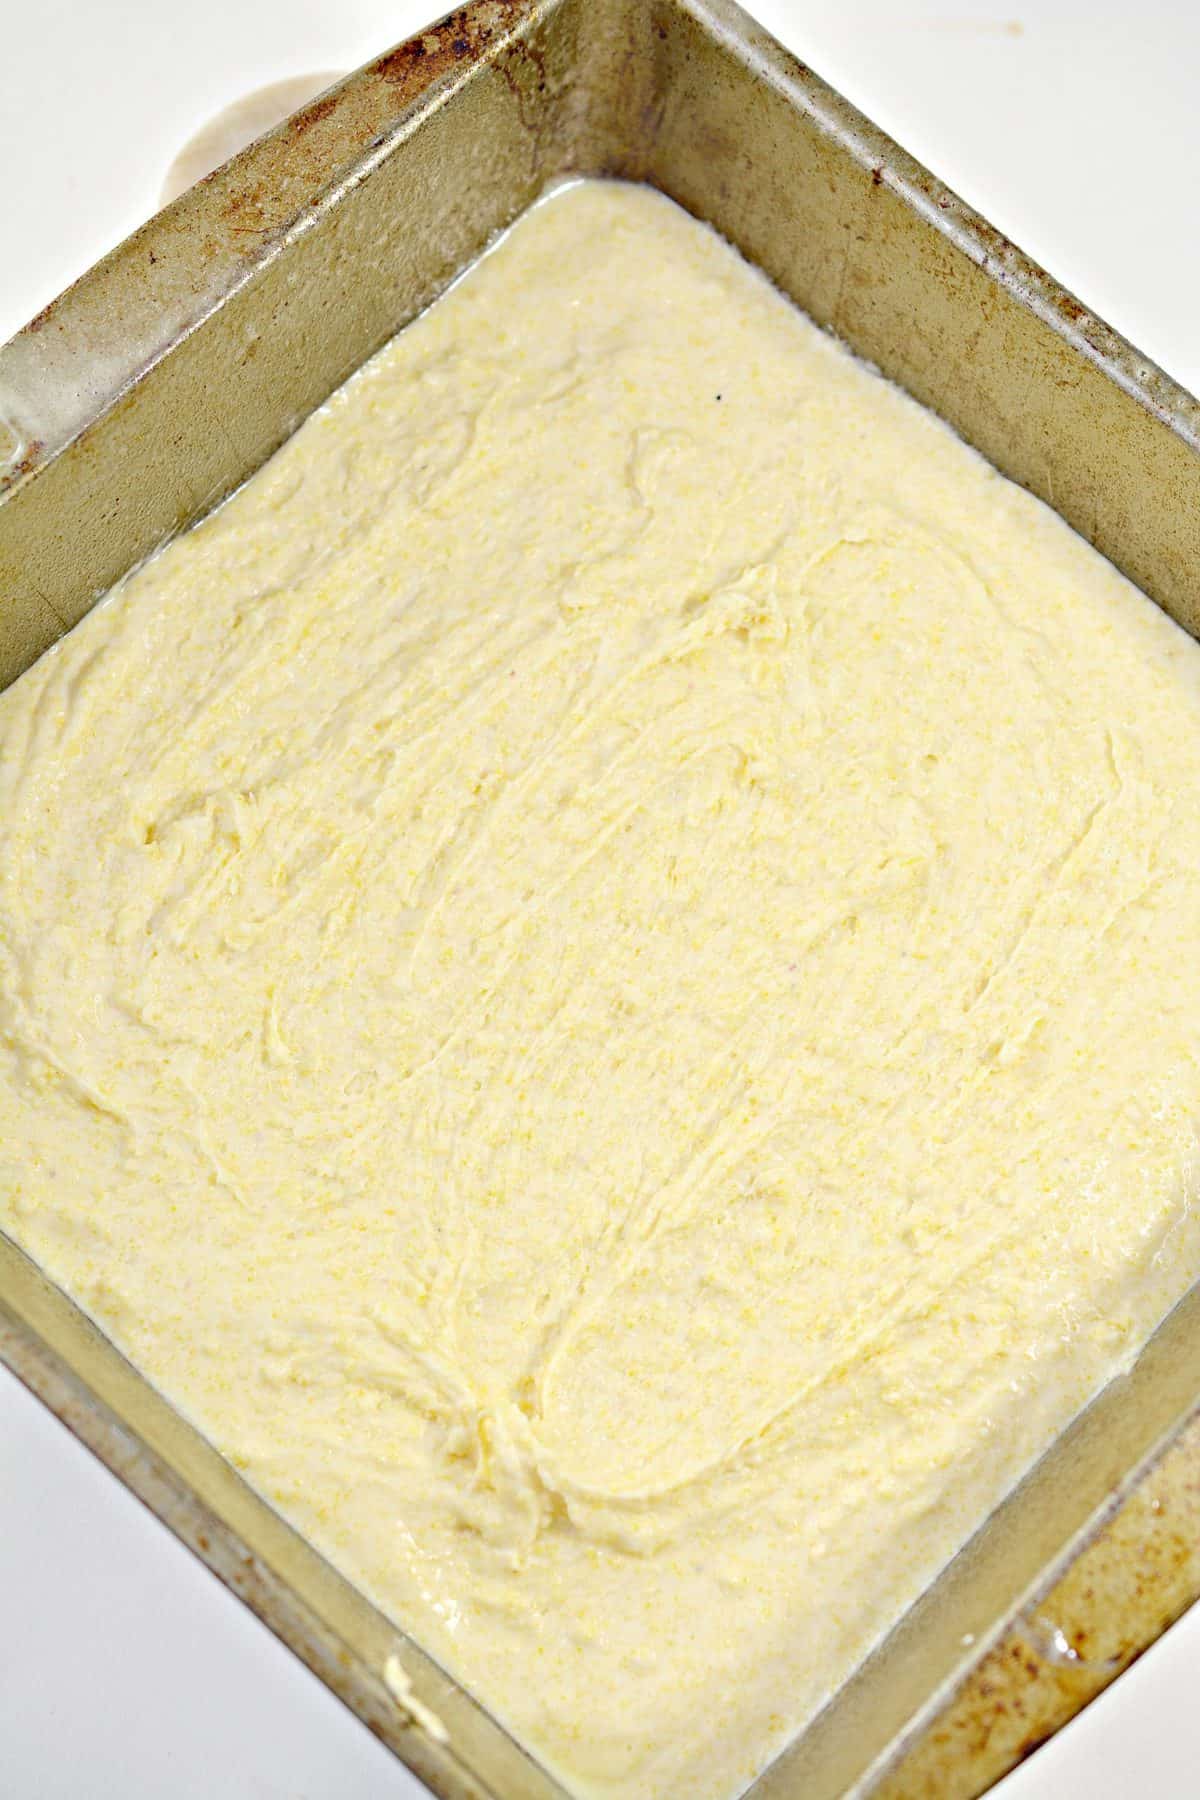 Prepare the cornbread mix according to the directions on the package, and place it into a well-greased 9x9 baking dish.